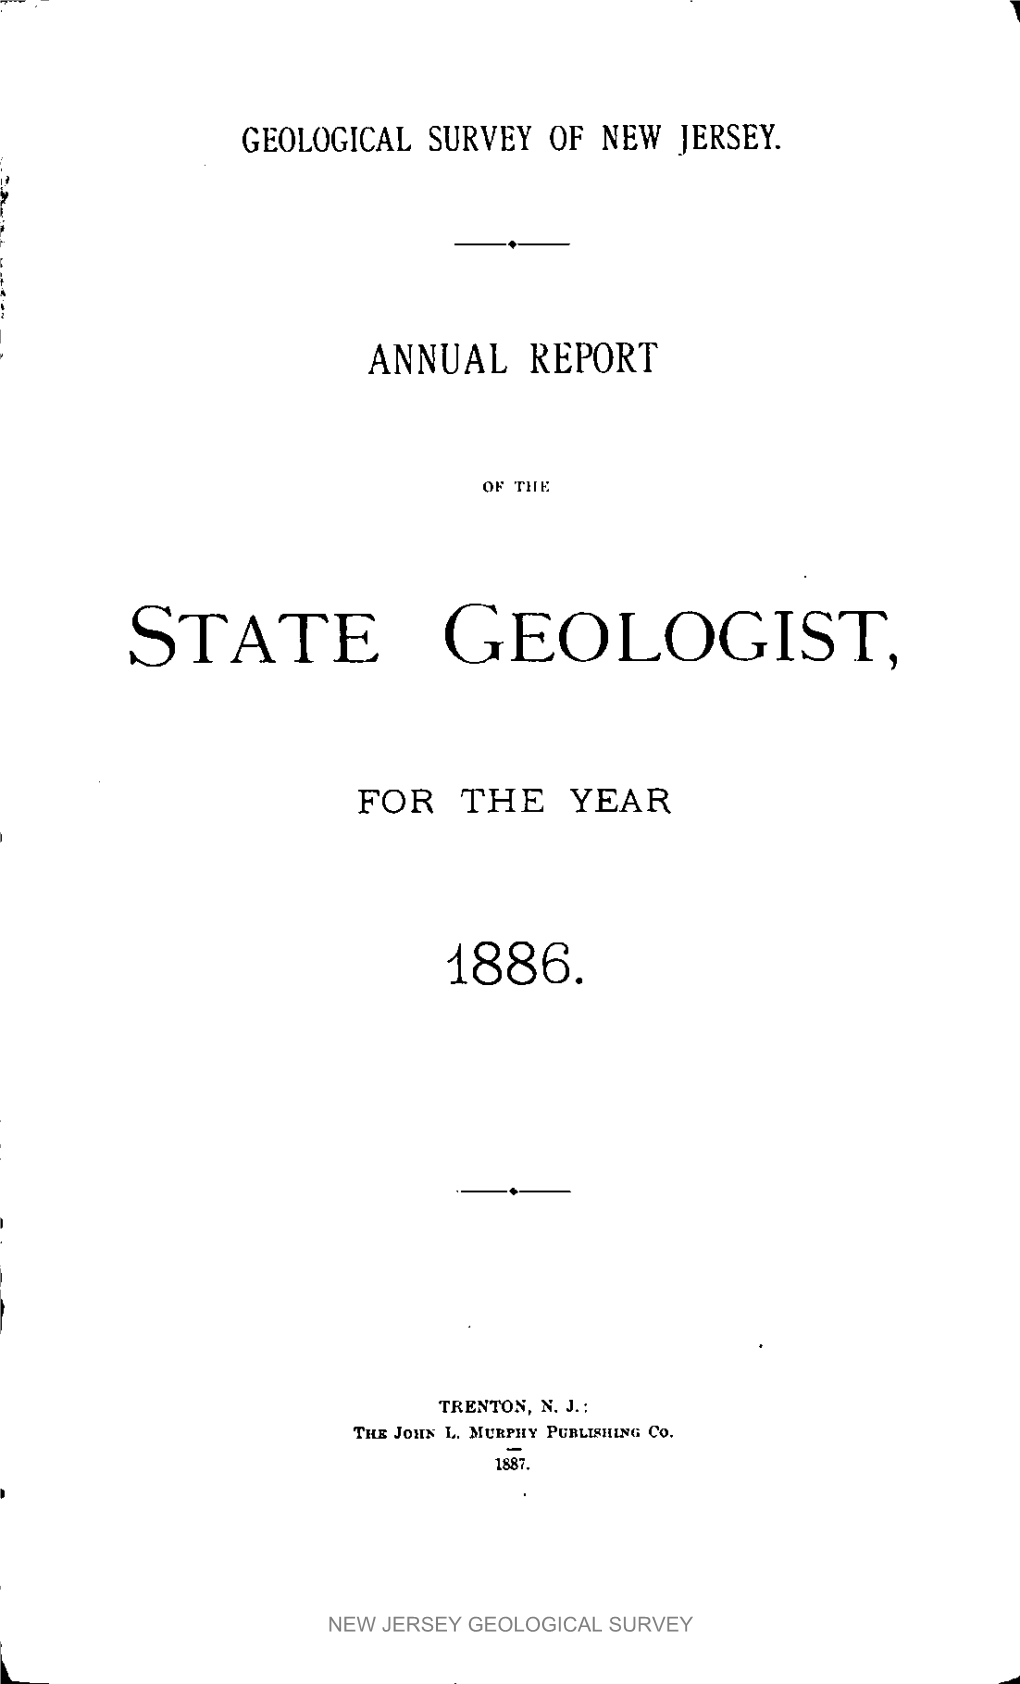 Annual Report of the State Geologist for the Year 1886